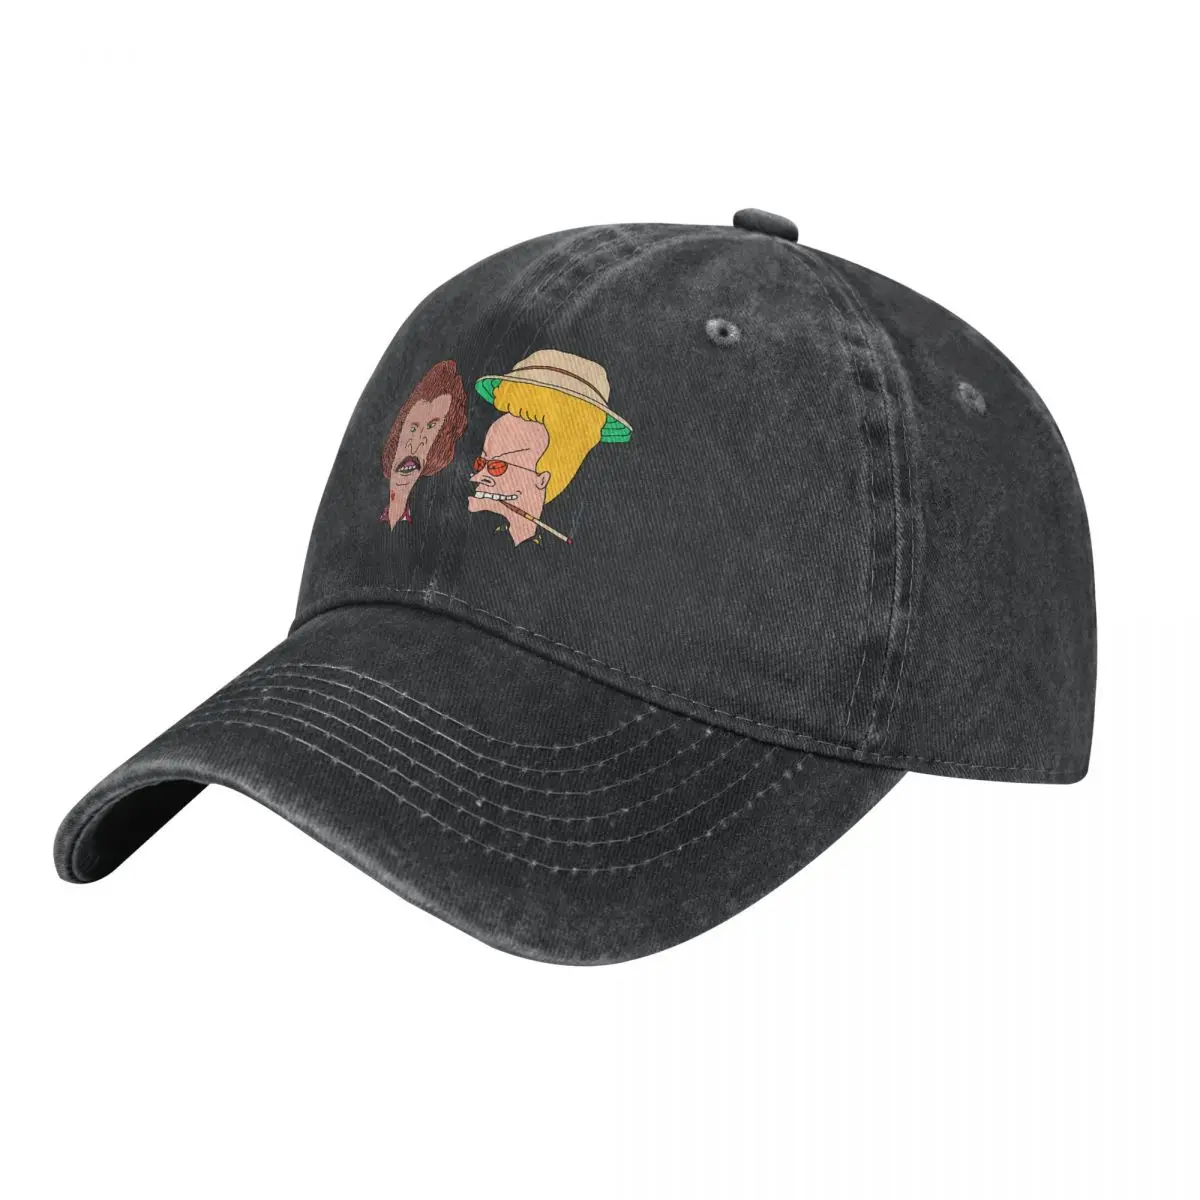 

Beavis And Butthead Multicolor Hat Peaked Women's Cap In The Style Of Fear And Loathing In Las Vegas Visor Protection Hats